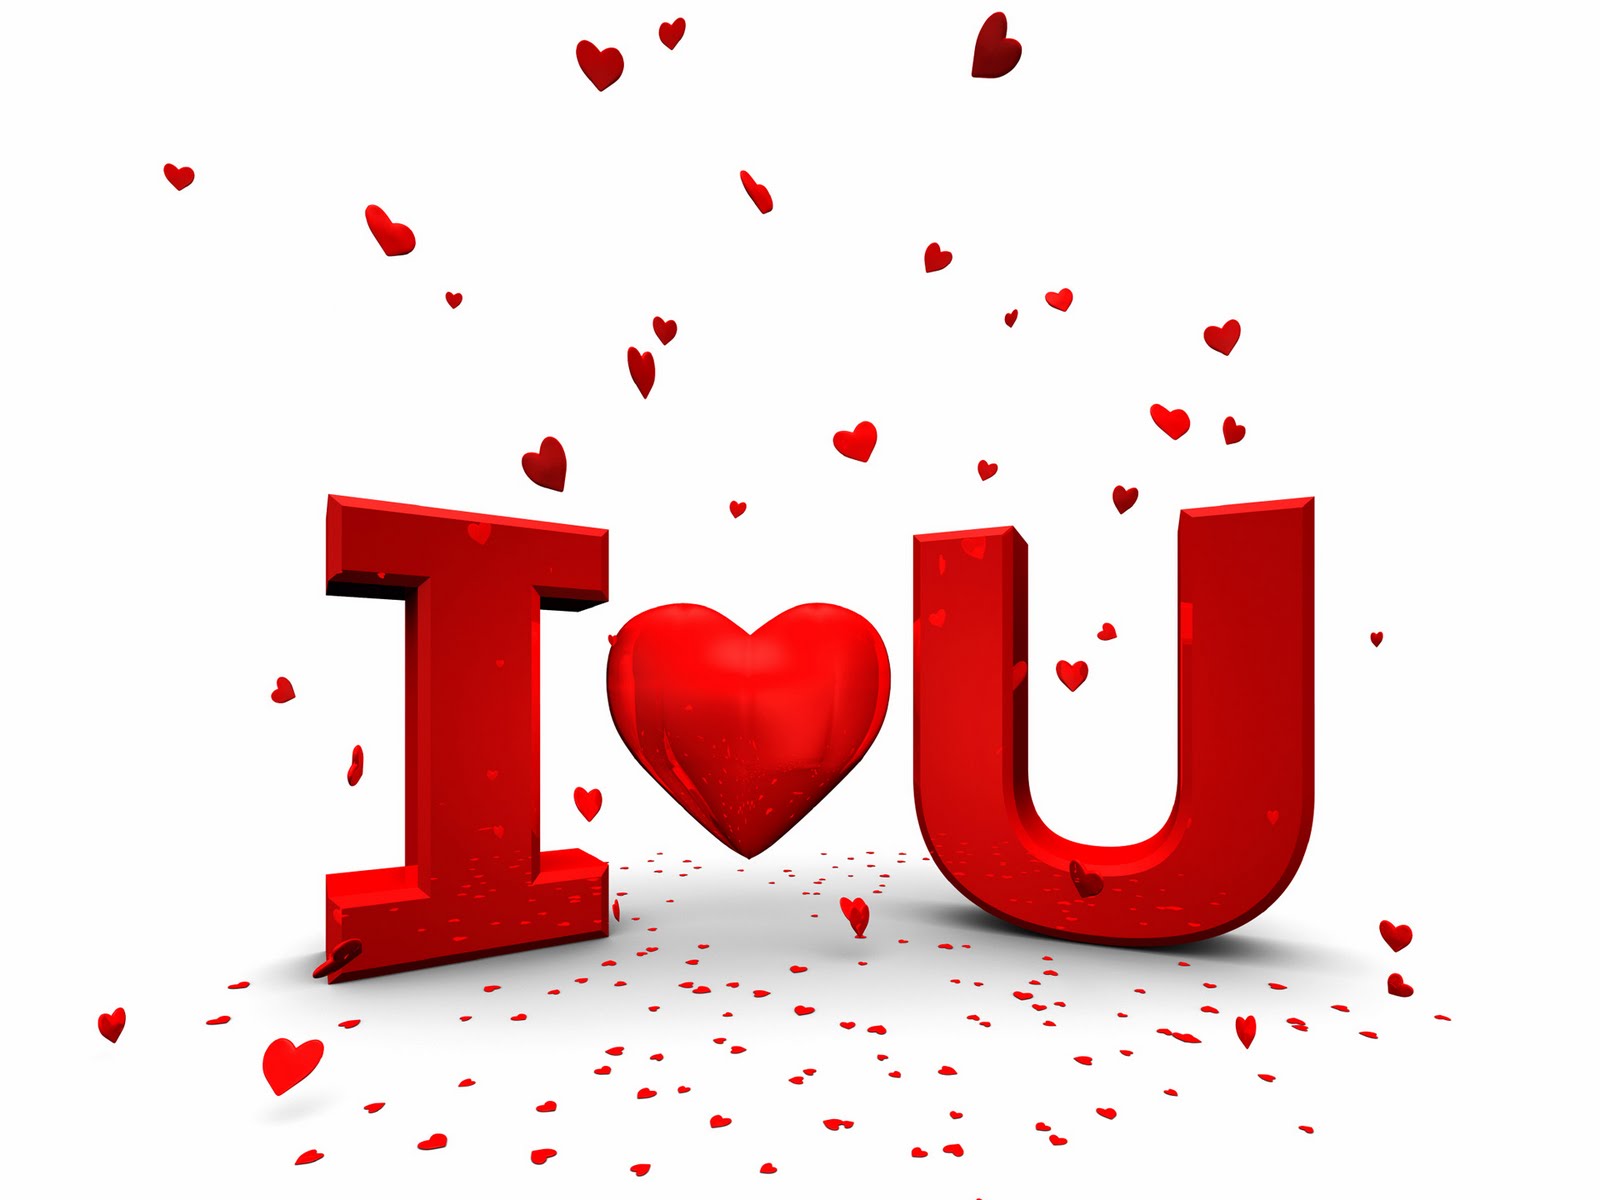 11. I Love You 2 (too) Hd Wallpaper 2014 On Valentines Day